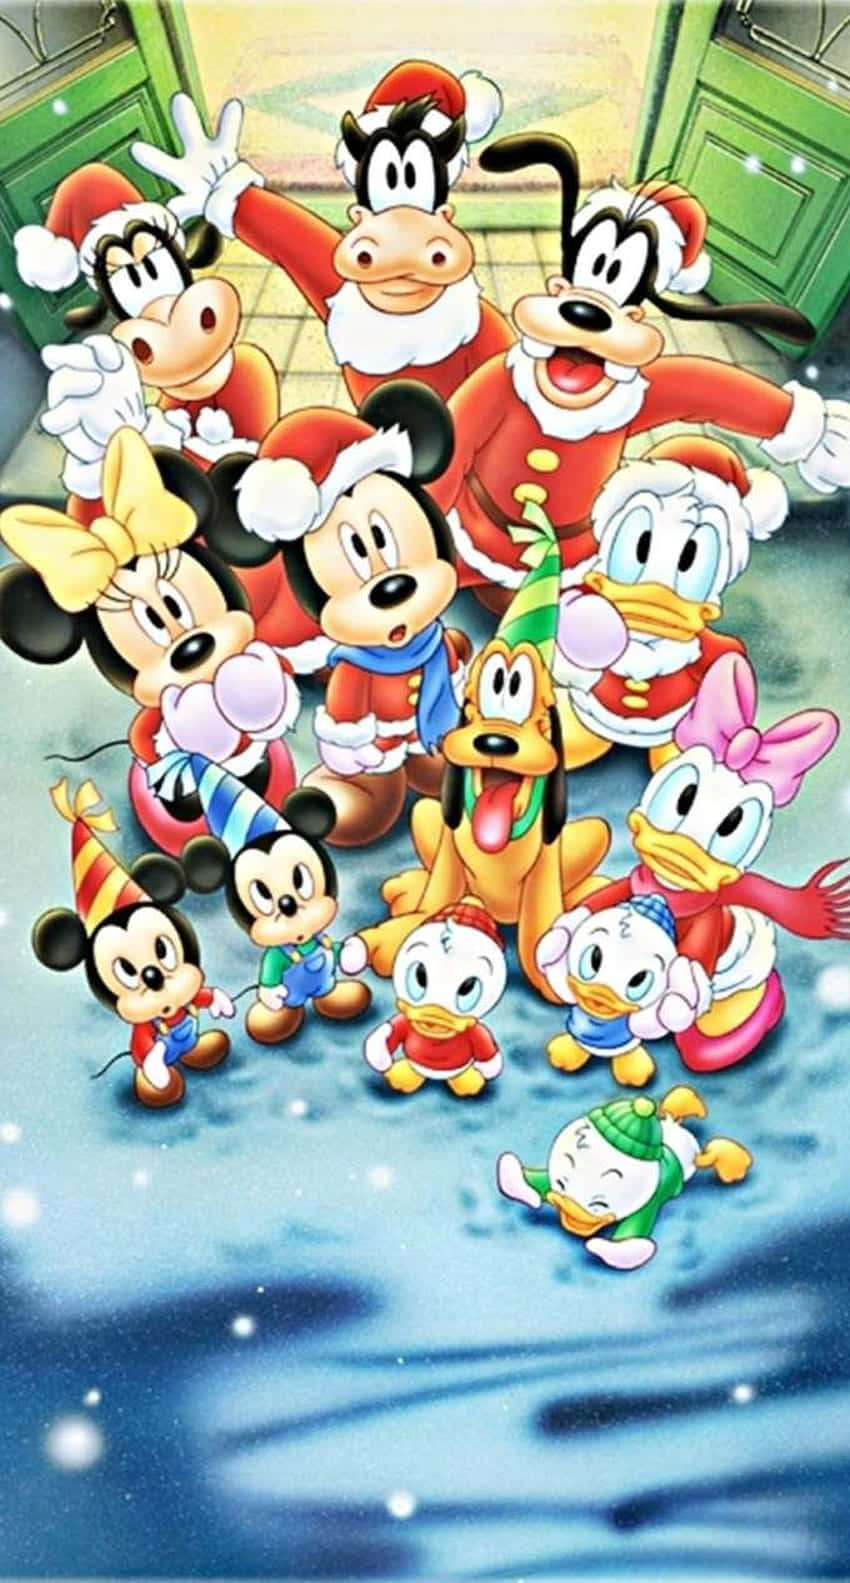 Cute Disney Christmas Mickey Mouse And Friends Wallpaper